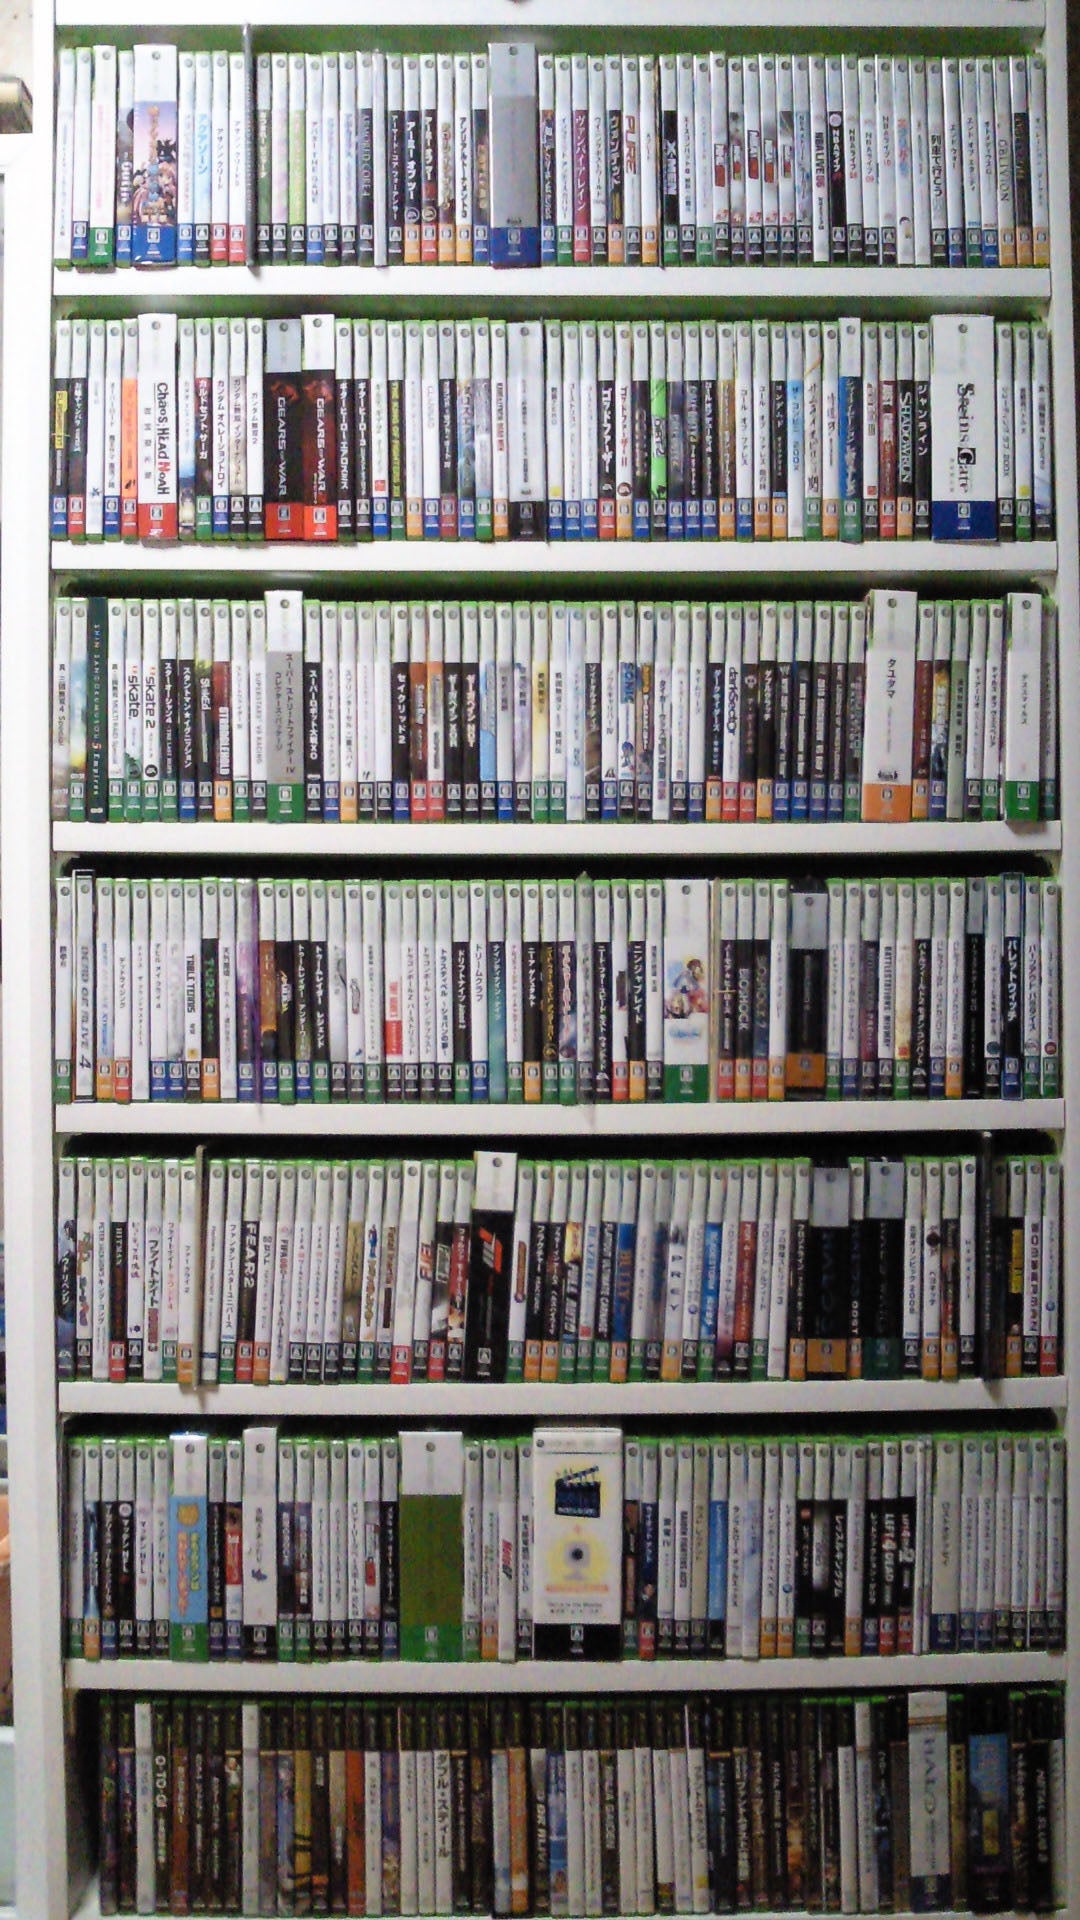 Would You Like To See All Of The Xbox 360 Games?